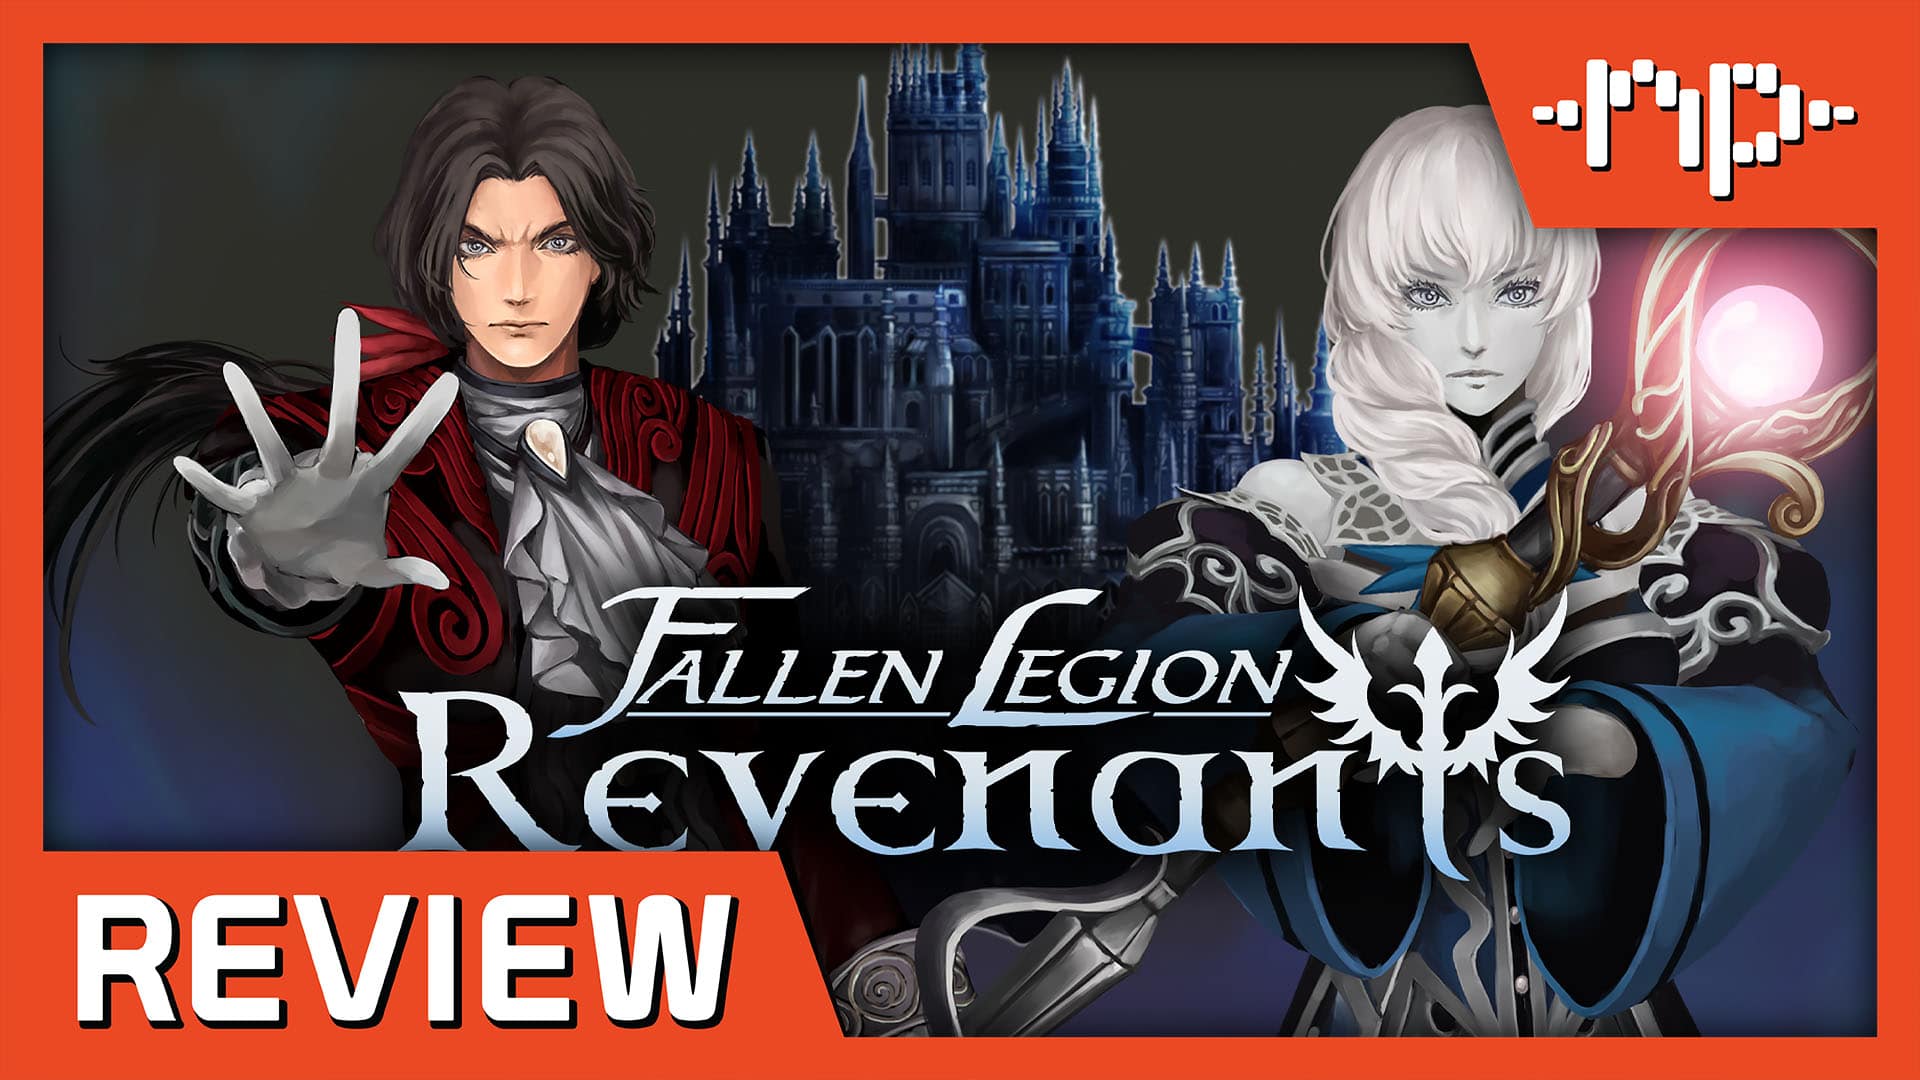 Fallen Legion Revenants Review – Two Sided Conundrums